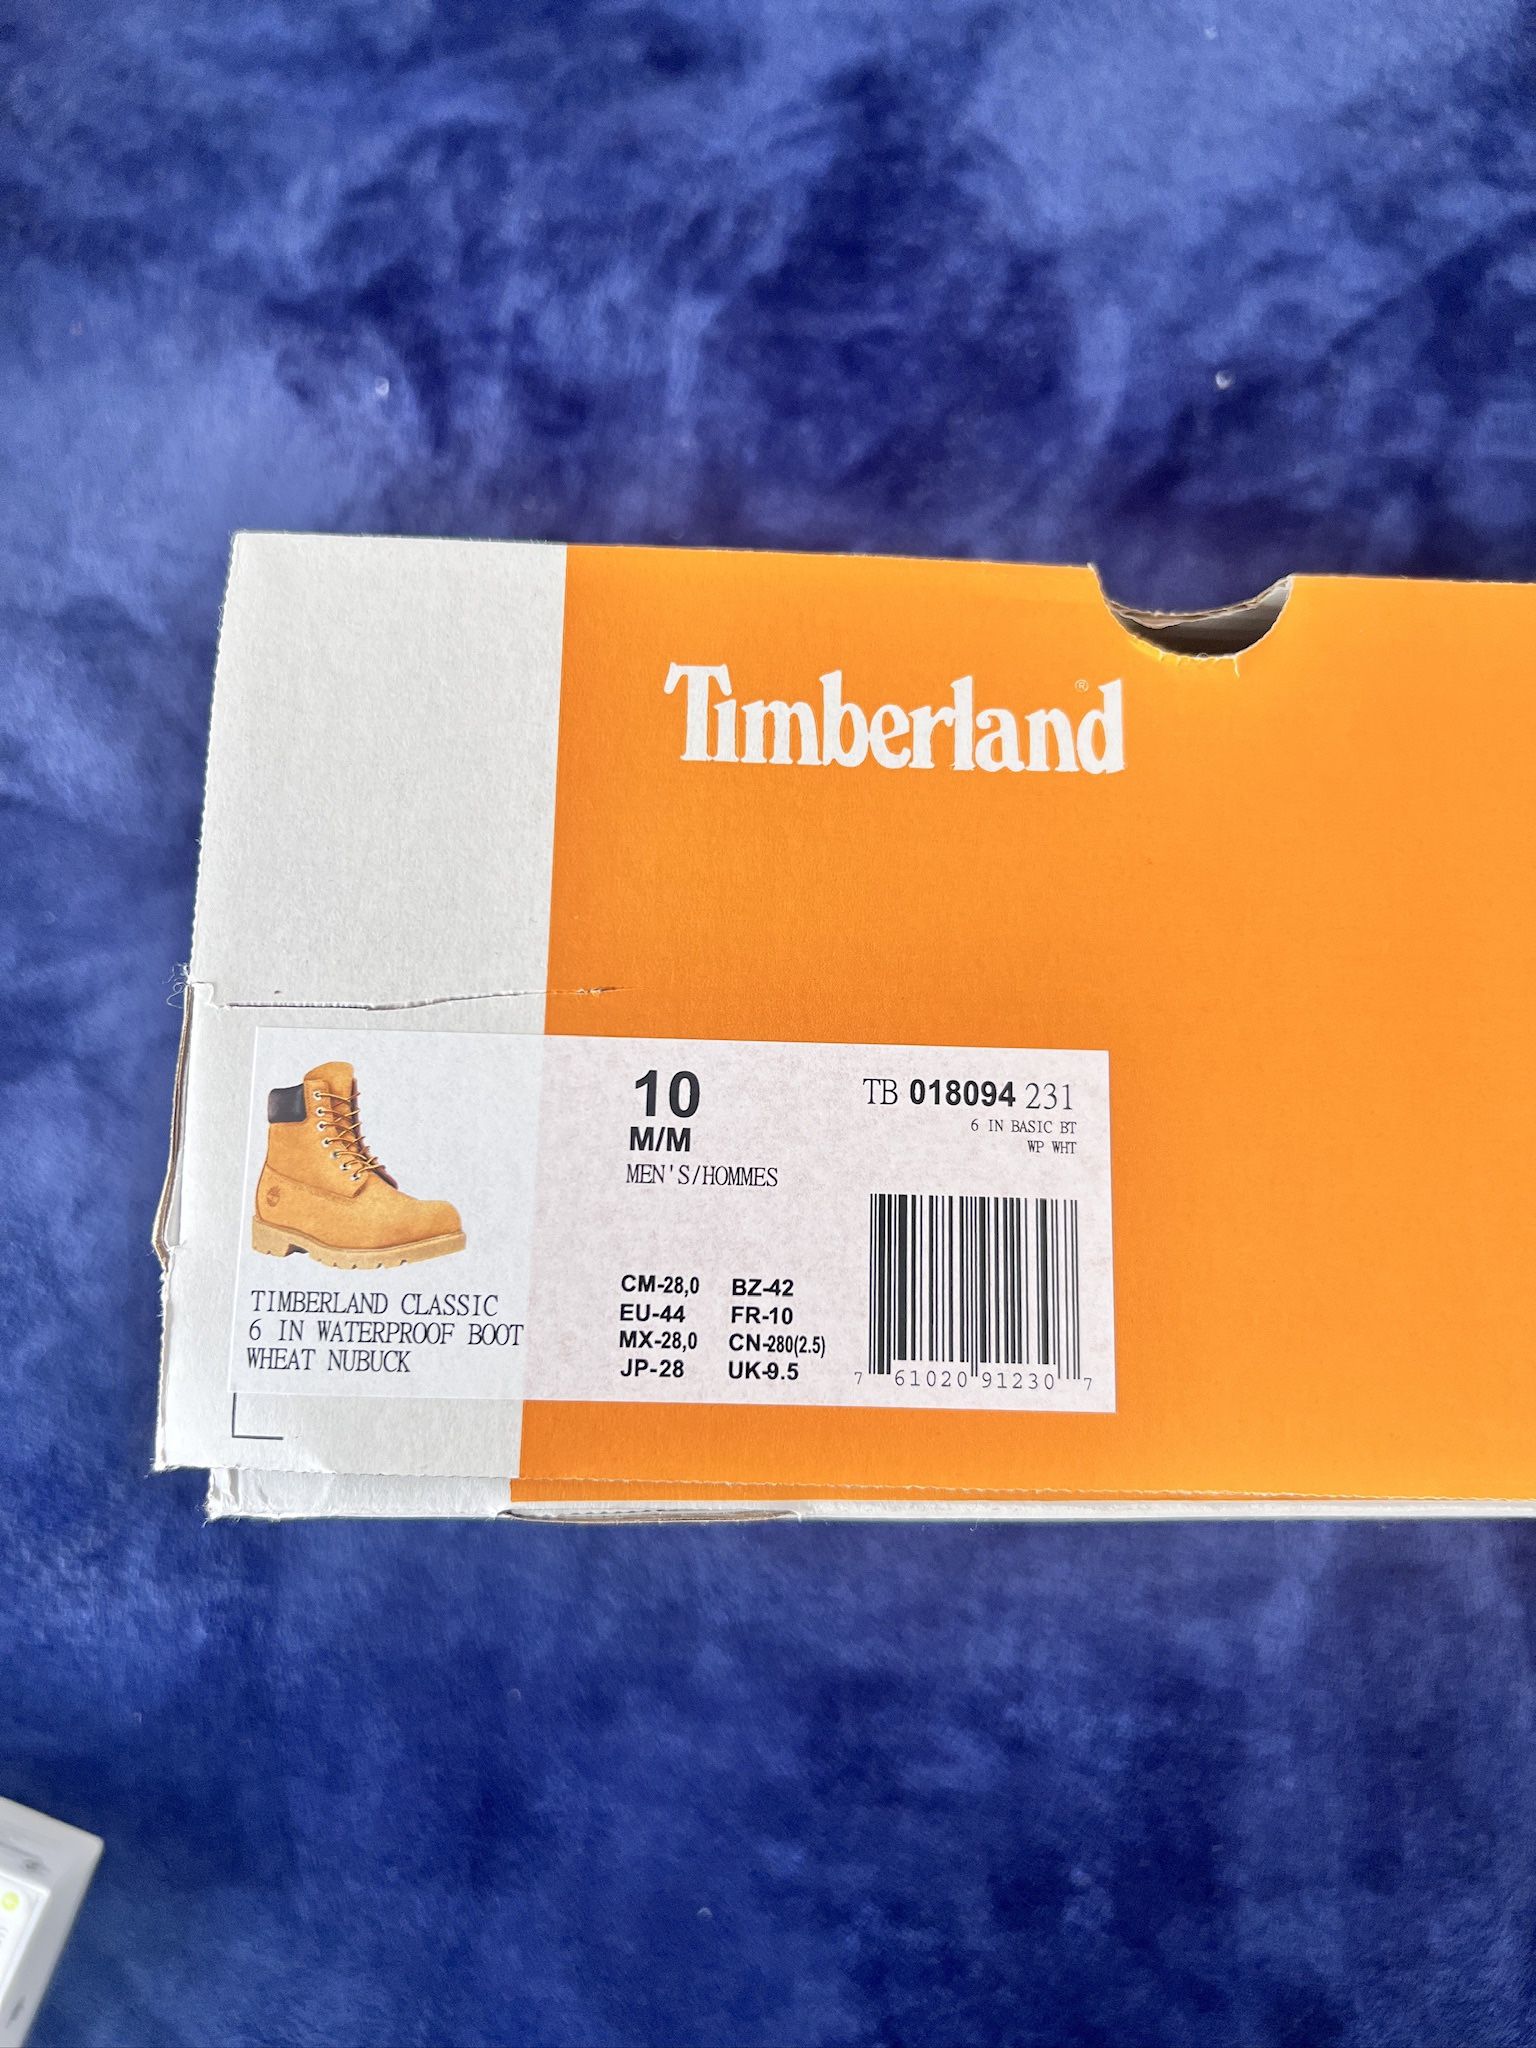 Timberland Boots Classic Size 10